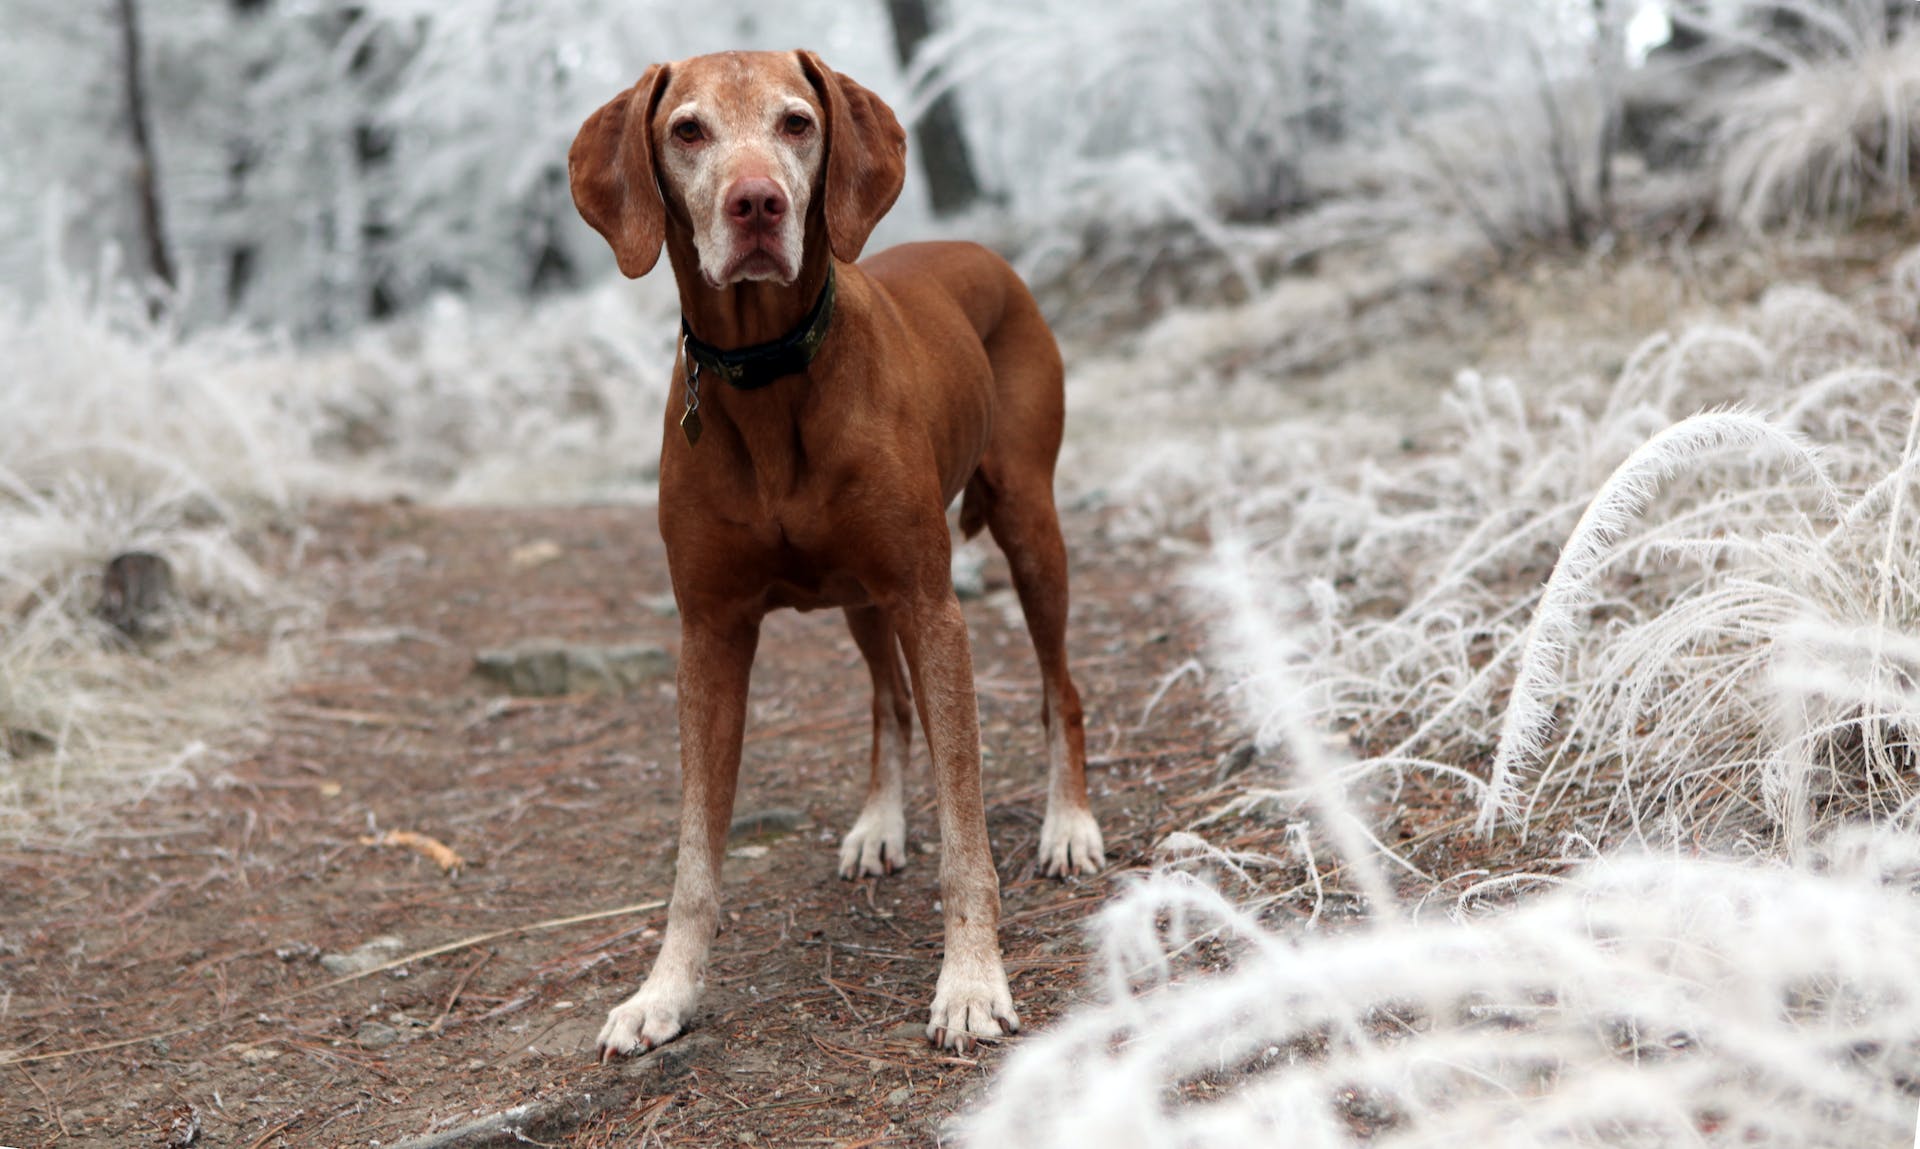 A brown dog standing in a snowy forest